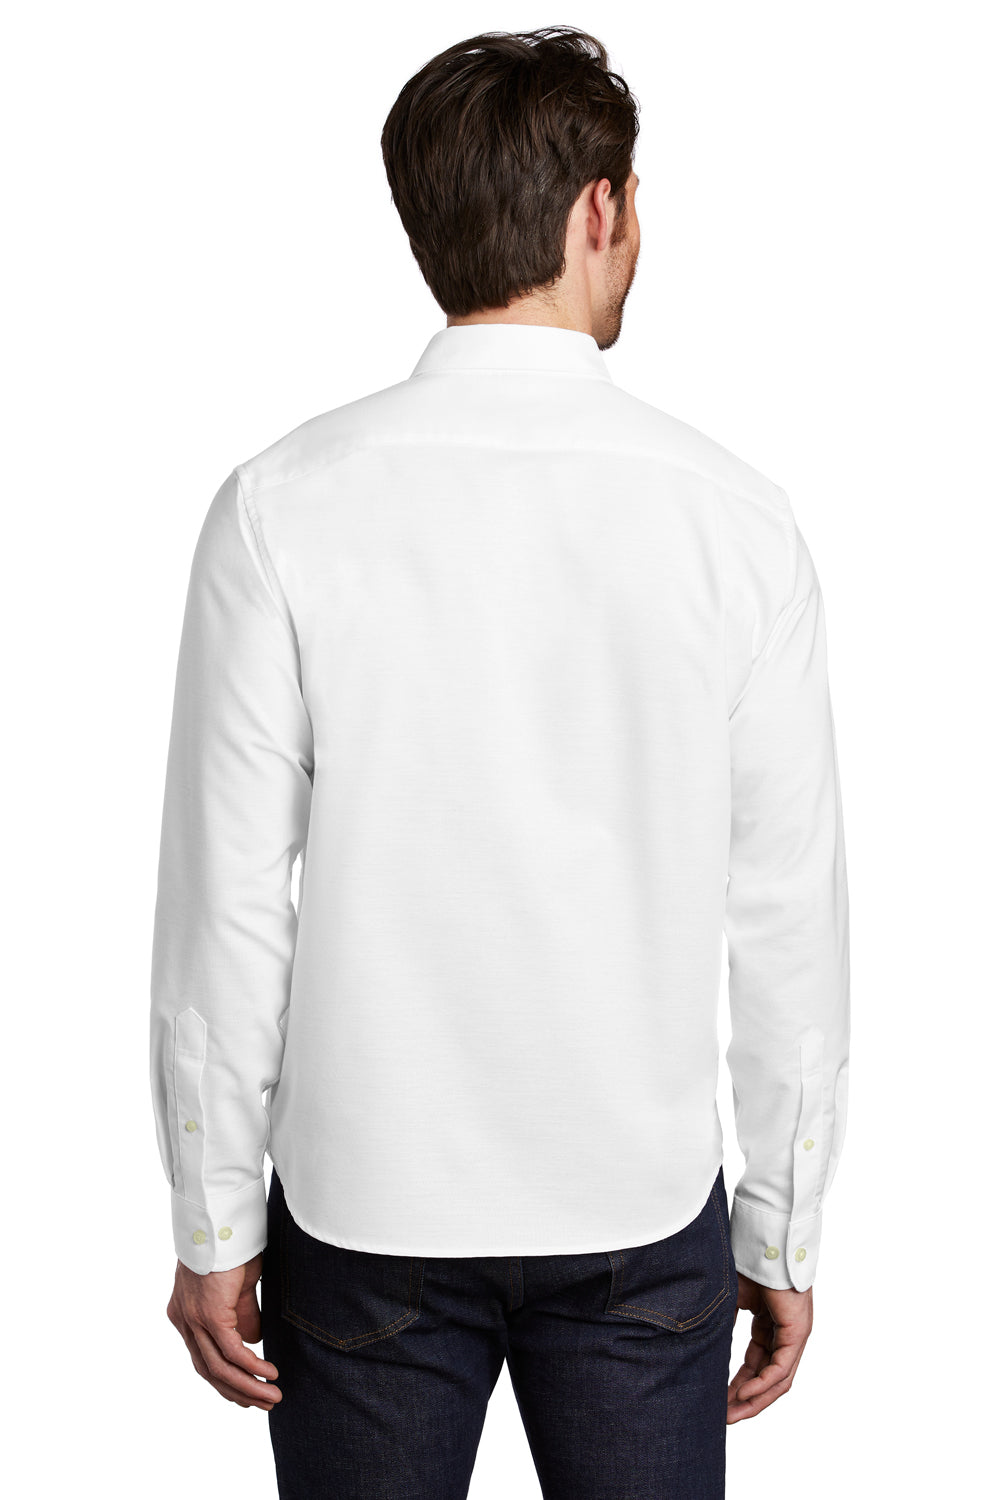 Port Authority Mens SuperPro Long Sleeve Button Down Shirt White Side